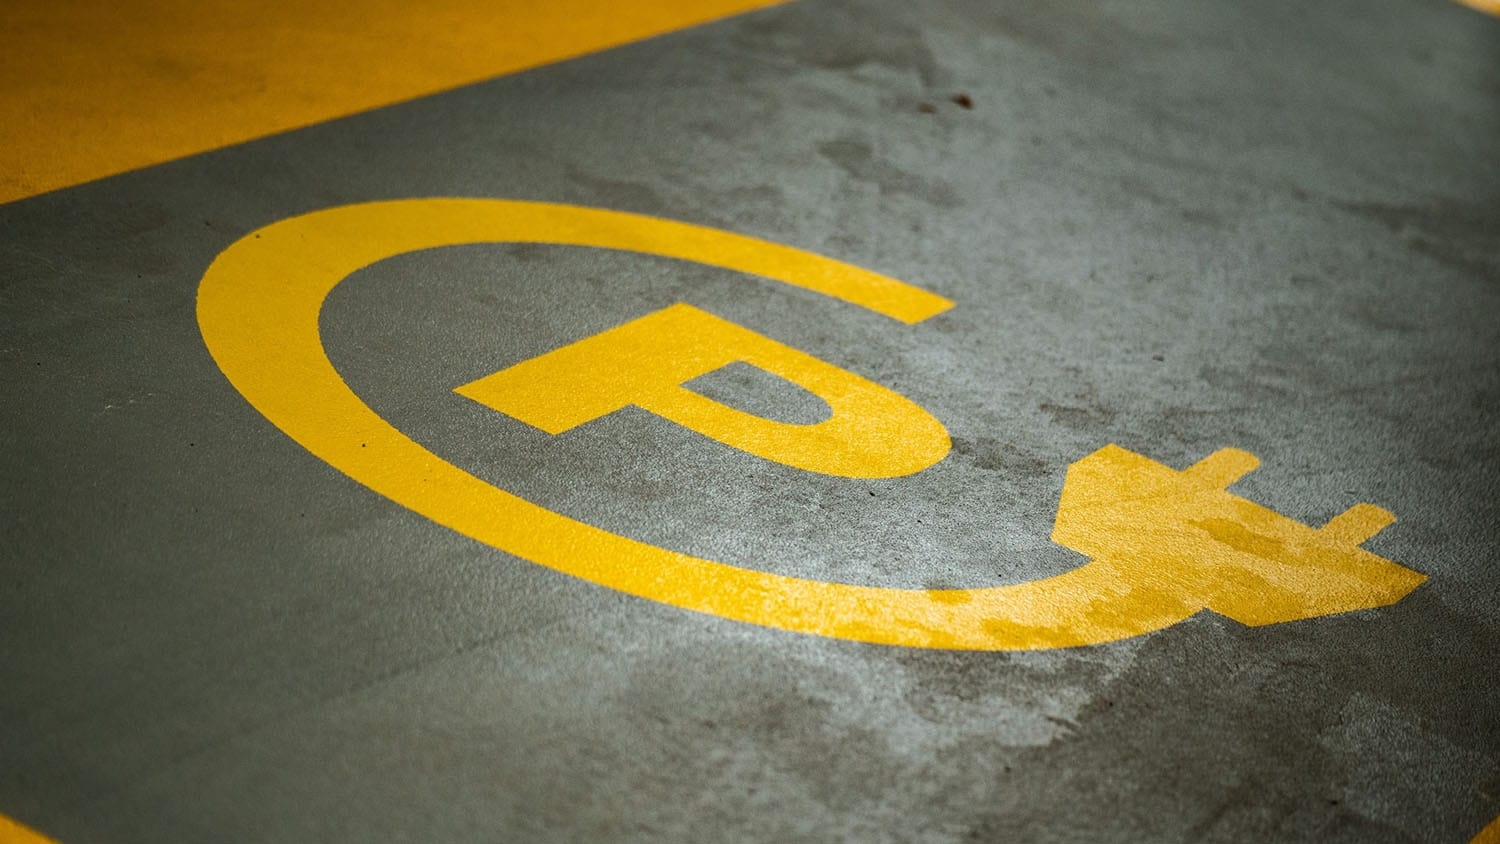 Parking space features sign specifying it is for charging electric vehicles only